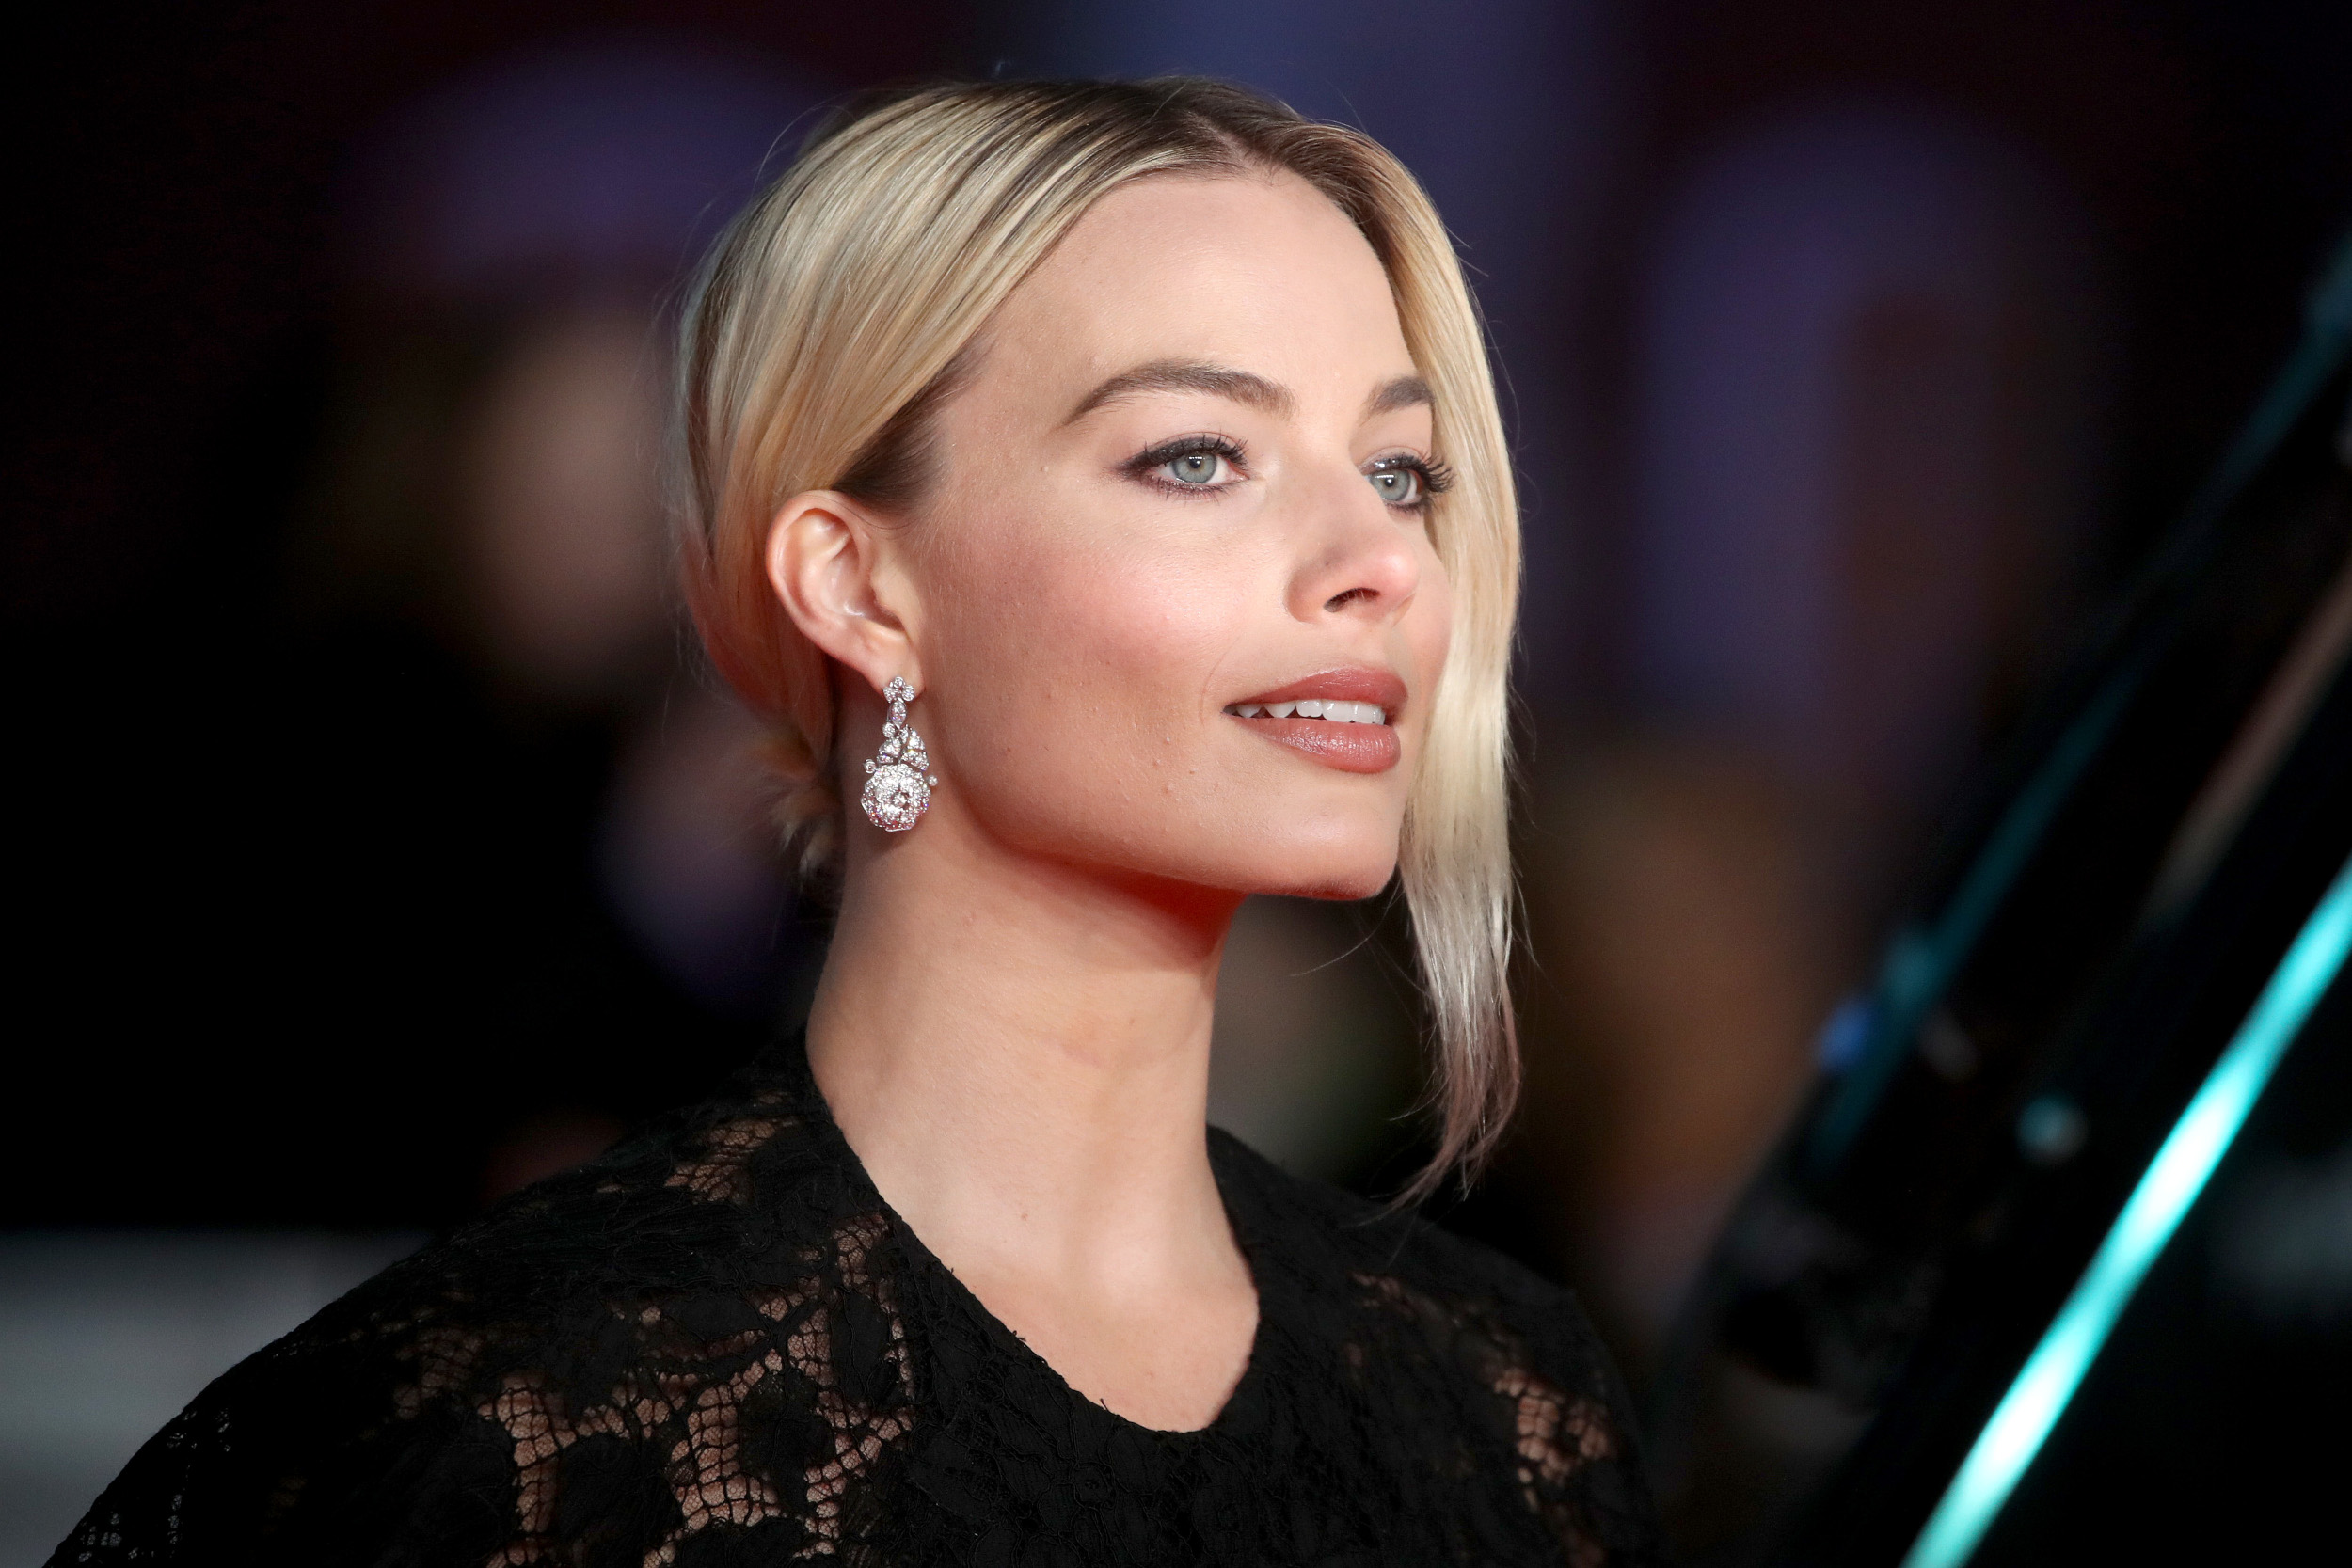 Harley Quinn actor Margot Robbie wearing a black dress on the red carpet